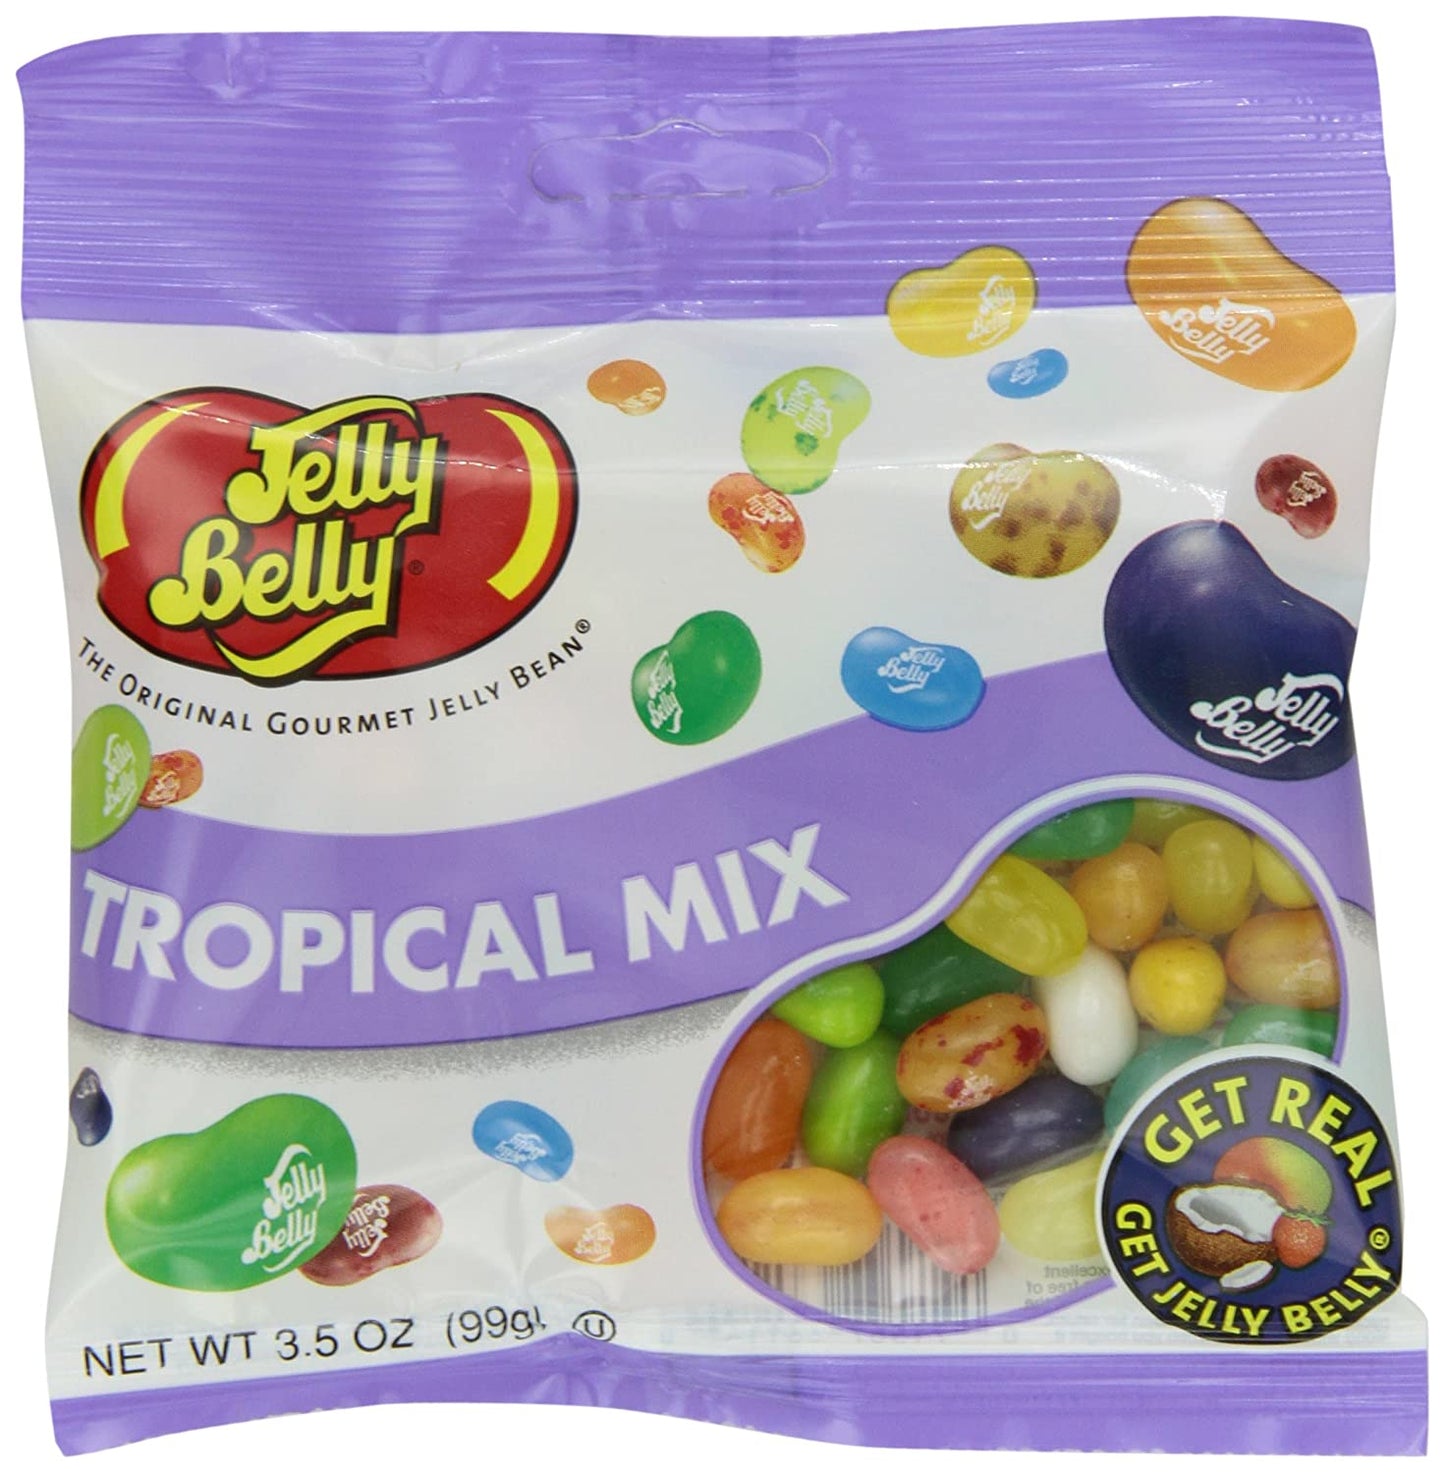 Jelly belly -Mélange tropical 100g